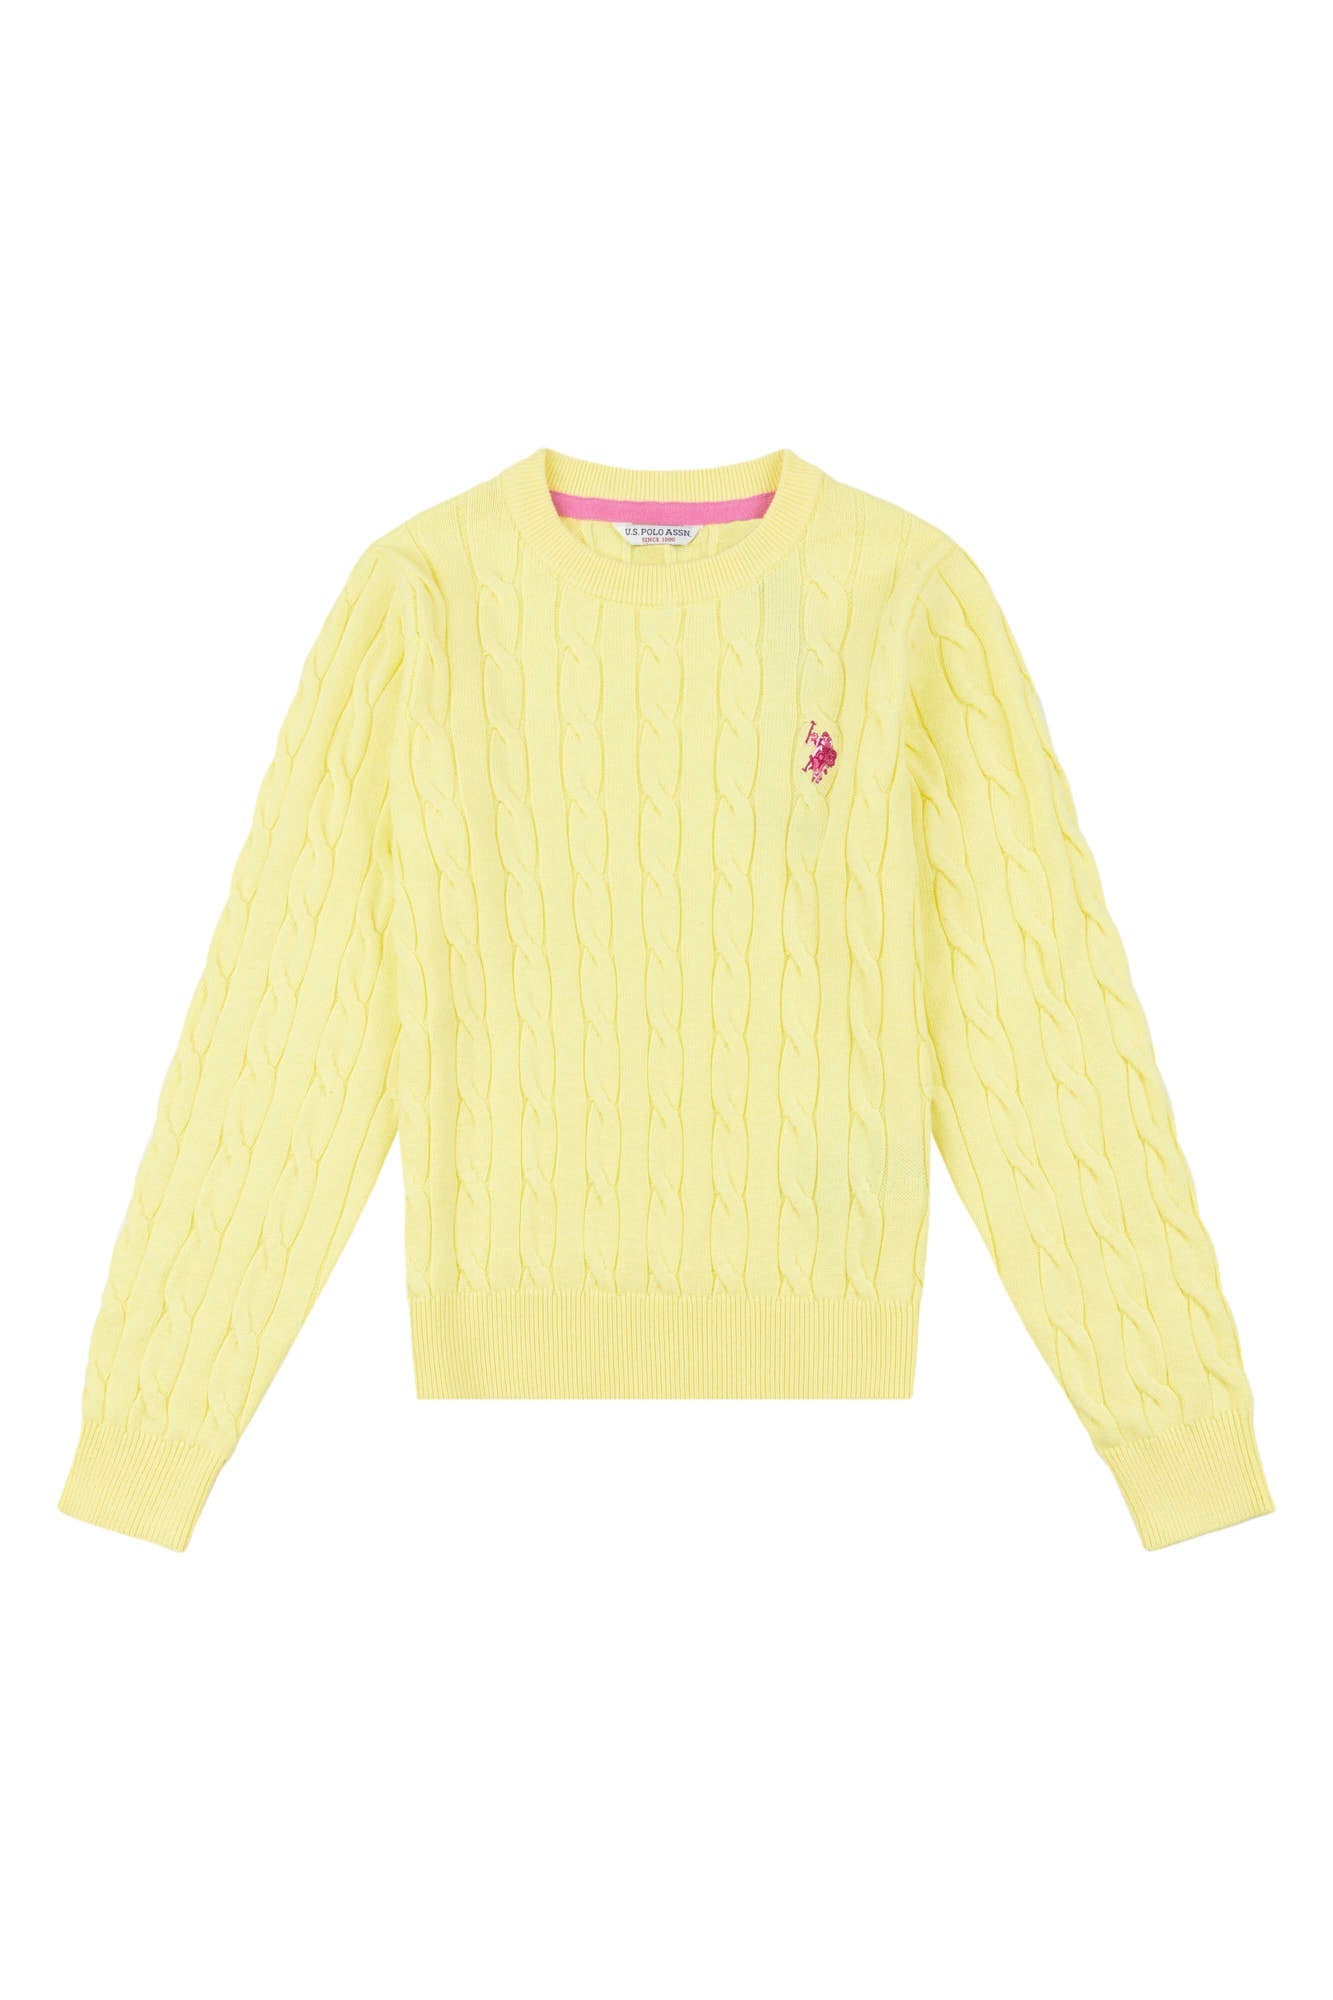 U.S. Polo Assn. Girls Cable Knit Jumper in Yellow Pear